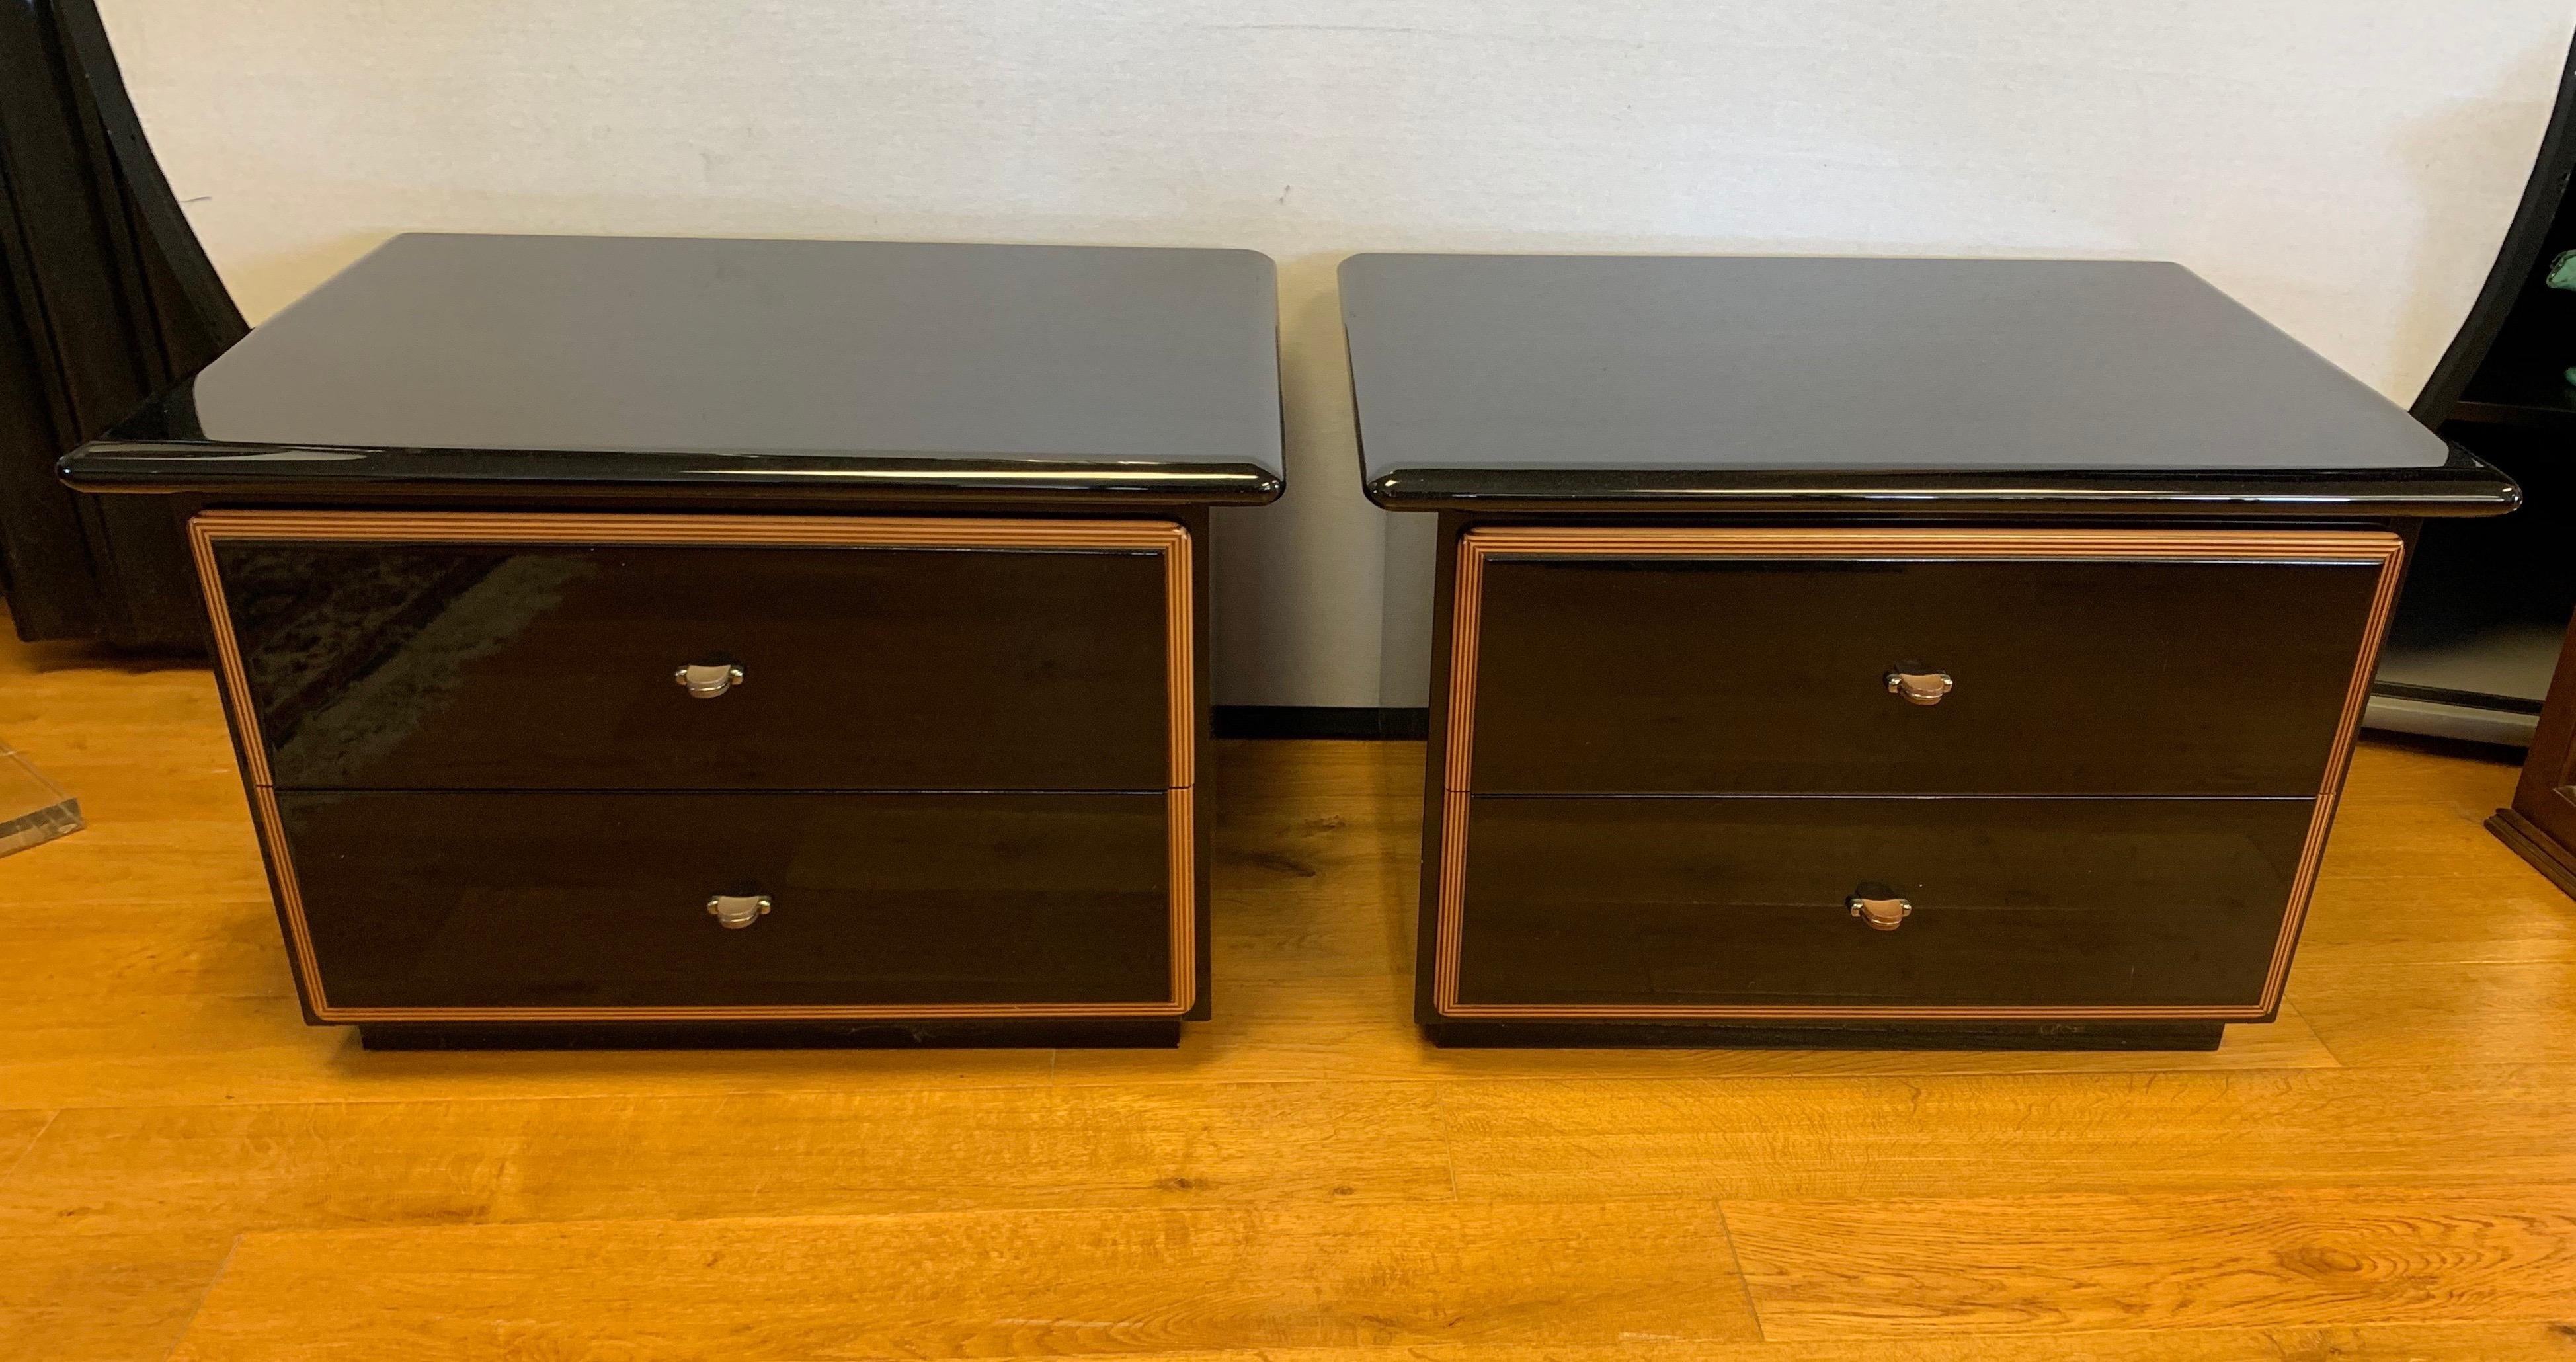 Roche Bobois pair of black lacquer sleek nightstands. Part of a larger Roche Bobois bedroom set that
we are selling separately on 1srDibs this week. This set was designed by Pierre Cardin, circa 1980s.
Made in Italy tags present.